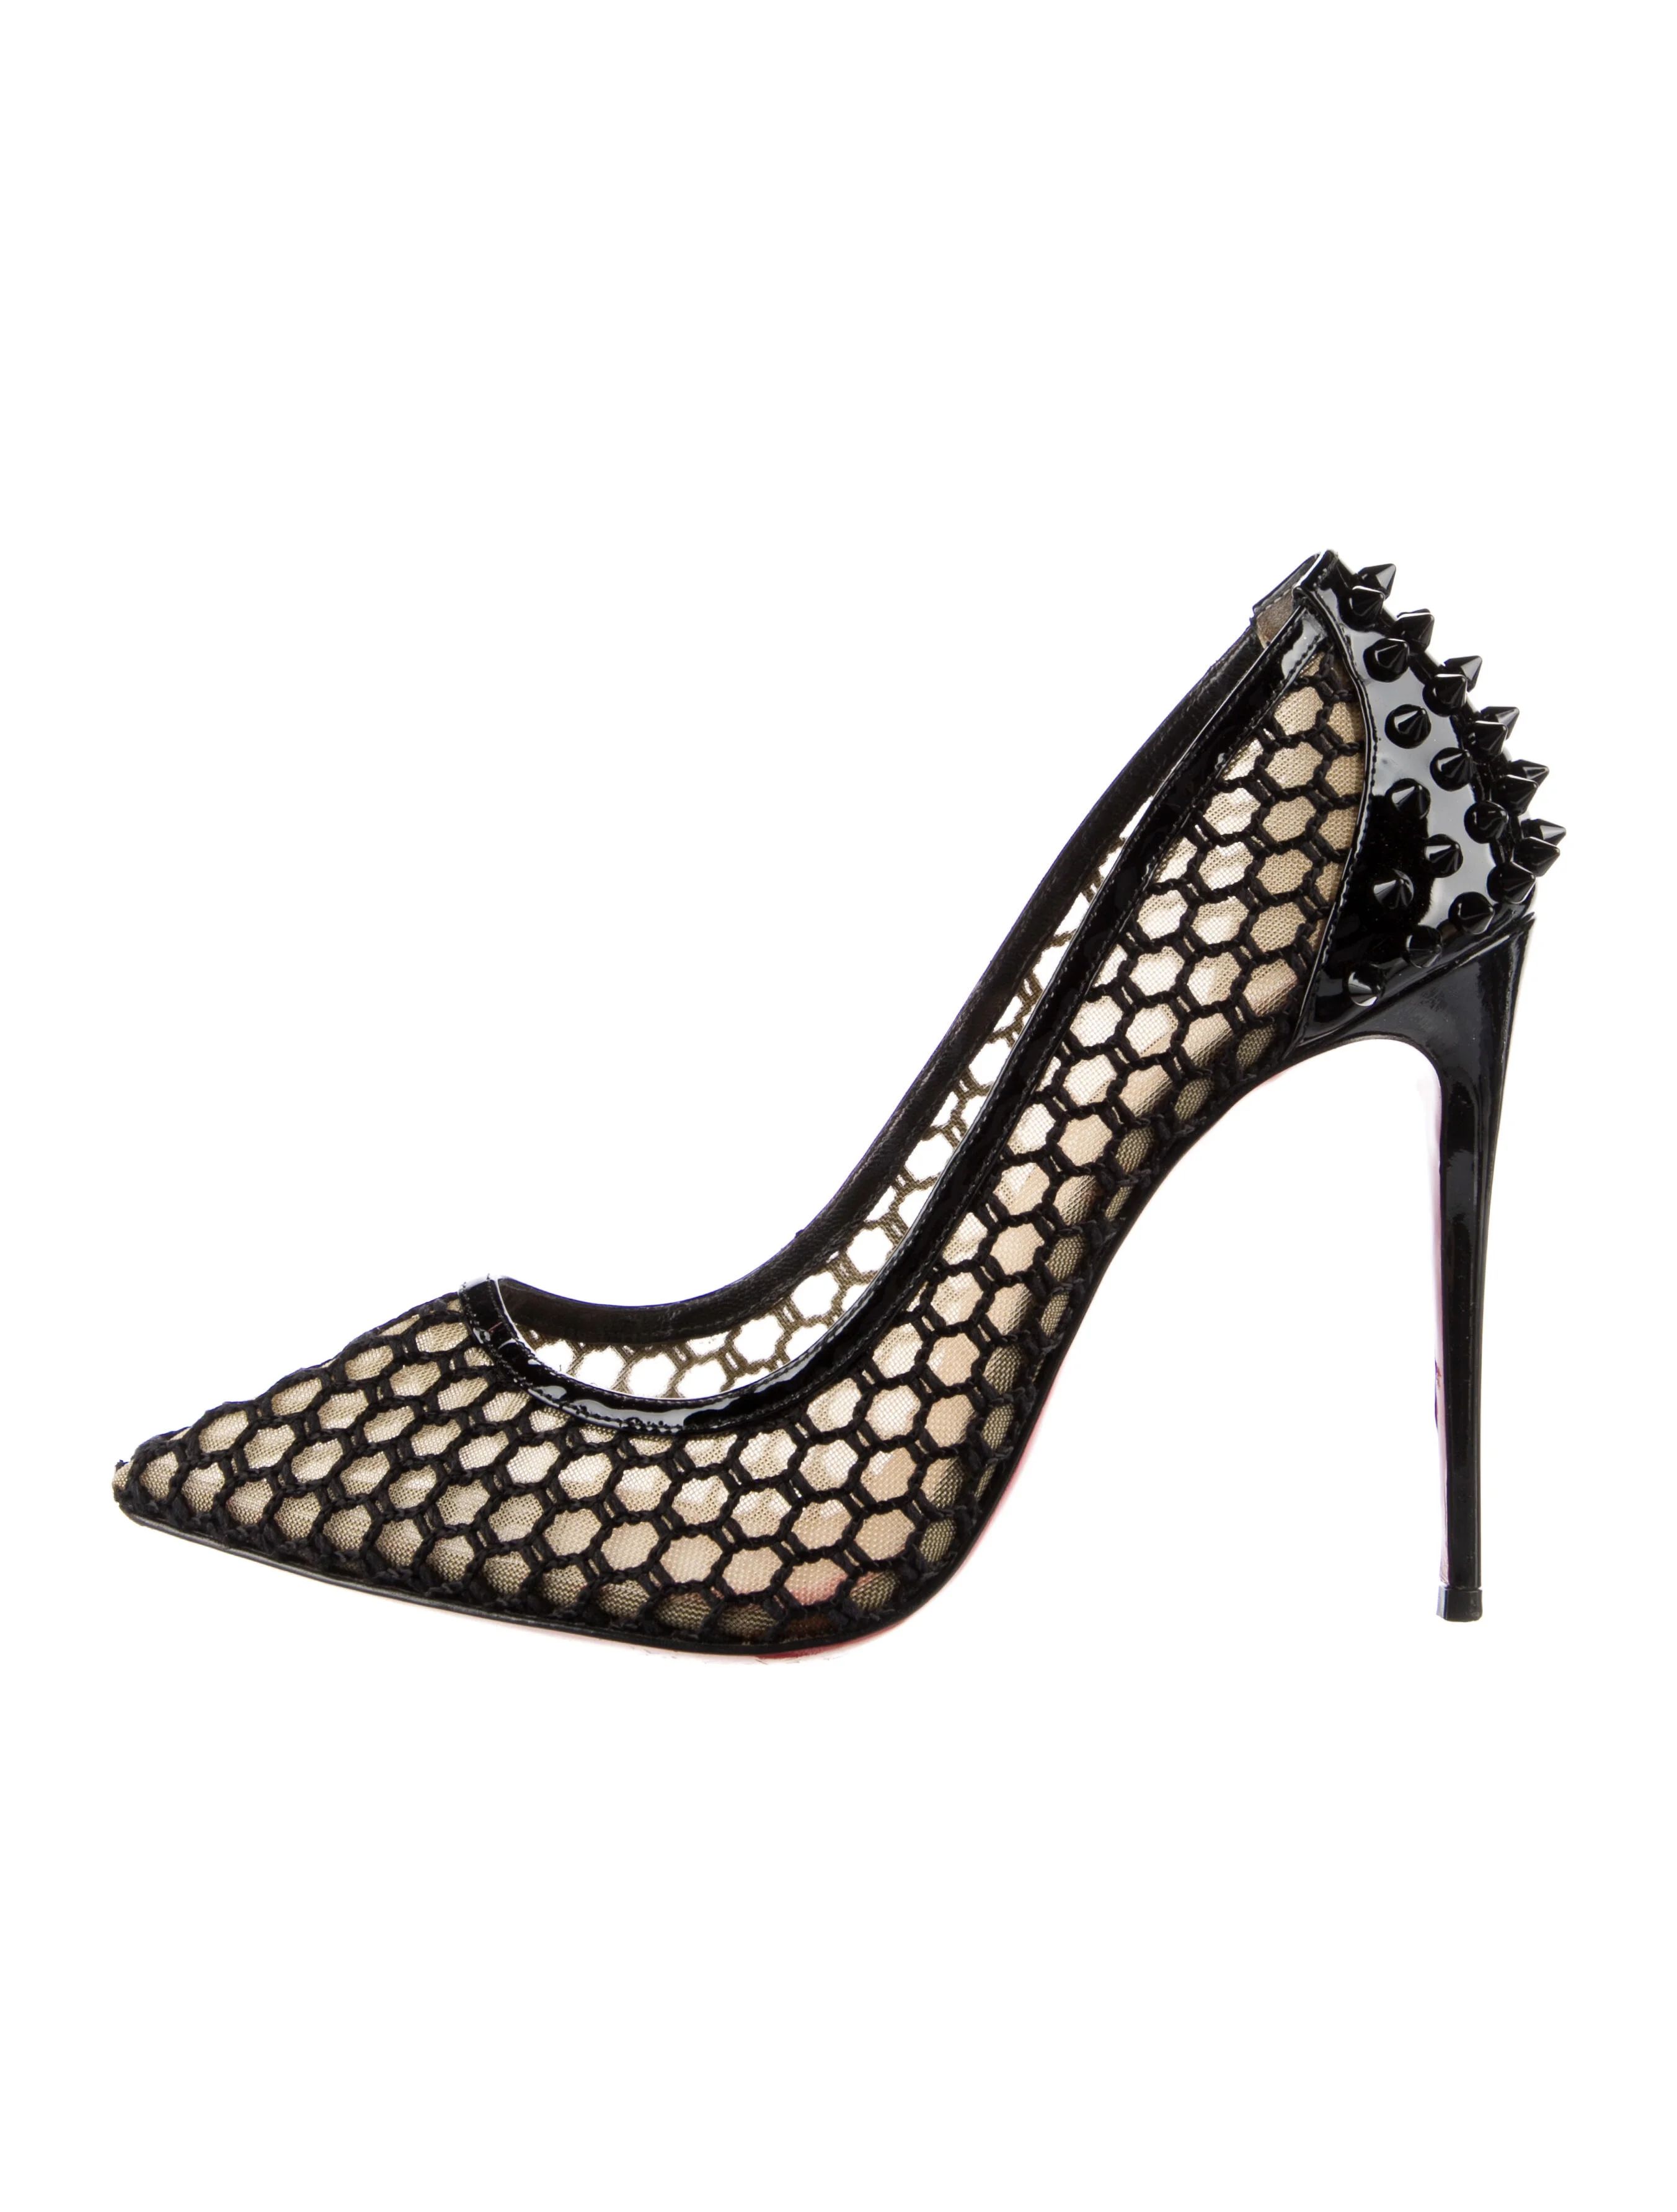 Guni 100 Spike Accents Pumps | The RealReal